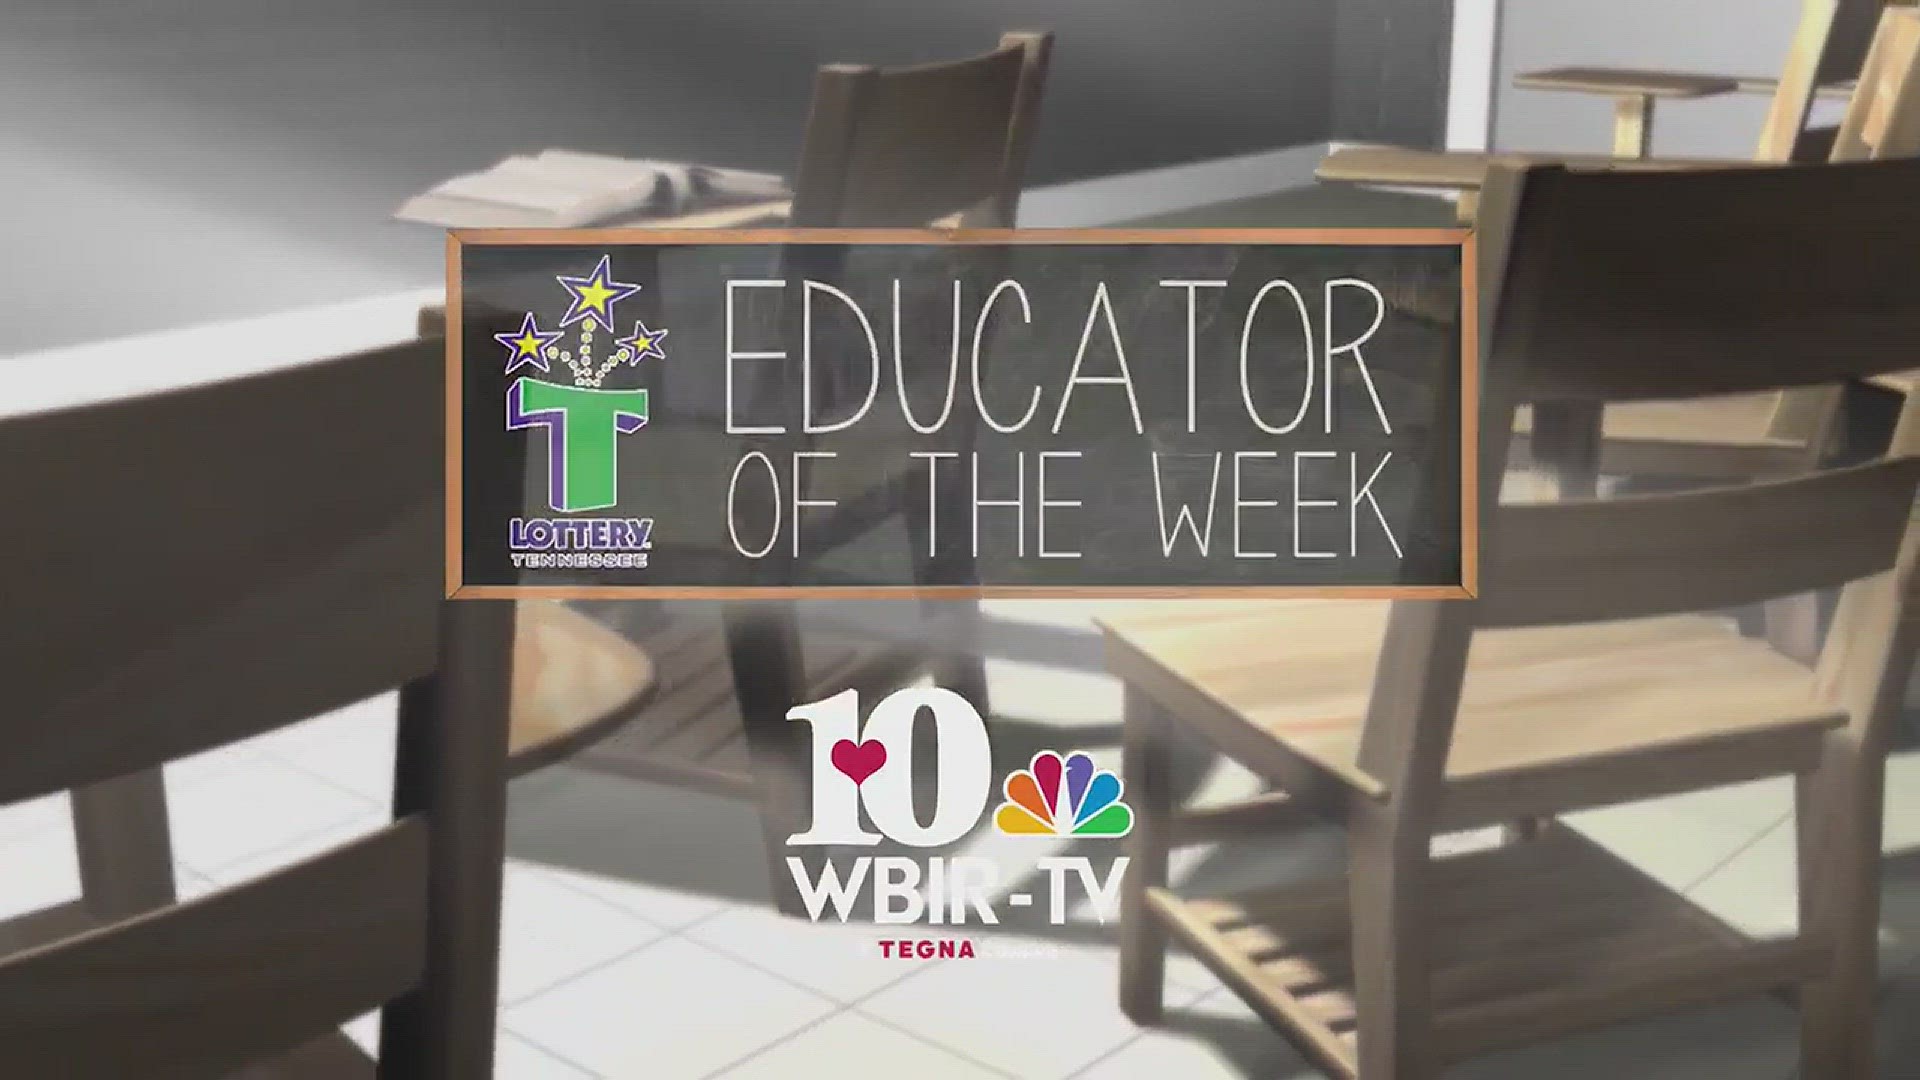 The Educator of the Week 3/6 is Thomas Bird